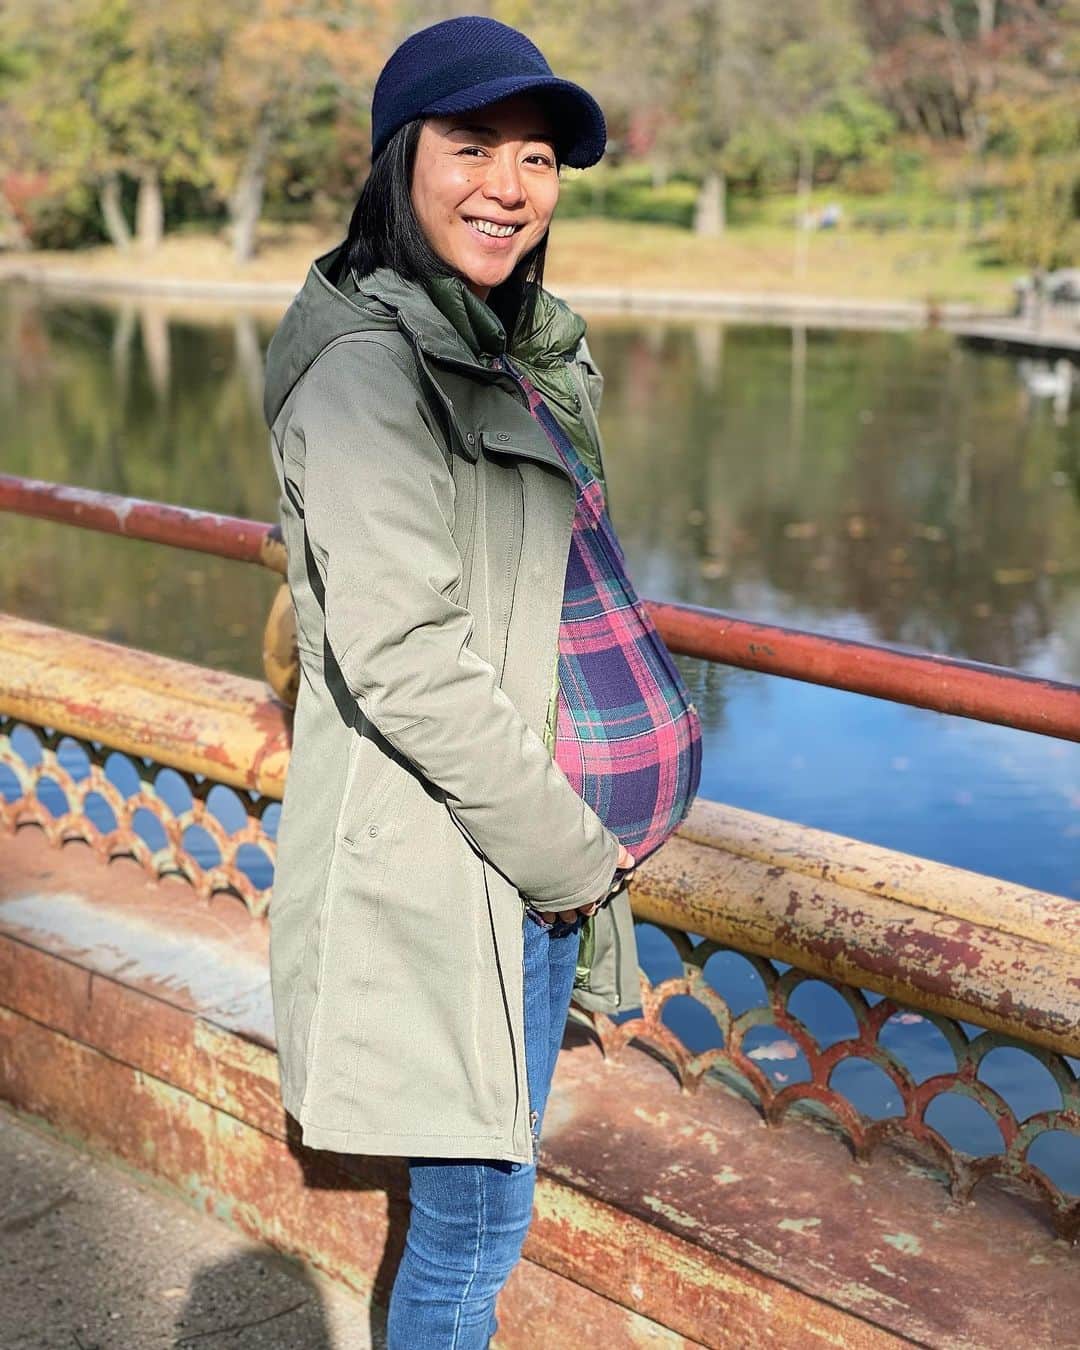 Ka-Naのインスタグラム：「Finally, today is my second baby’s due day!!! But she seems like she still wants to stay in my belly at the moment lol. So I went out to have lunch with my husband this afternoon because we wouldn’t be able to do it for a while after she is born. We’re just so excited to see our girl! Anyway, have a great day ;)  いよいよ本日、無事に出産予定日を迎えました！ でも、現時点で赤ちゃん生まれてきそうな気配がありません笑。 なので、夫と出産前最後のランチに行きました♪ マタニティーライフも本当にあとわずか！ 赤ちゃんには今すぐにでも会いたいけど、彼女のタイミングを気長に待ちつつ過ごしたいと思いまーす！  #マタニティーライフ #出産予定日 #第二子 #初めてのNY出産 #植村花菜 #kanauemura」